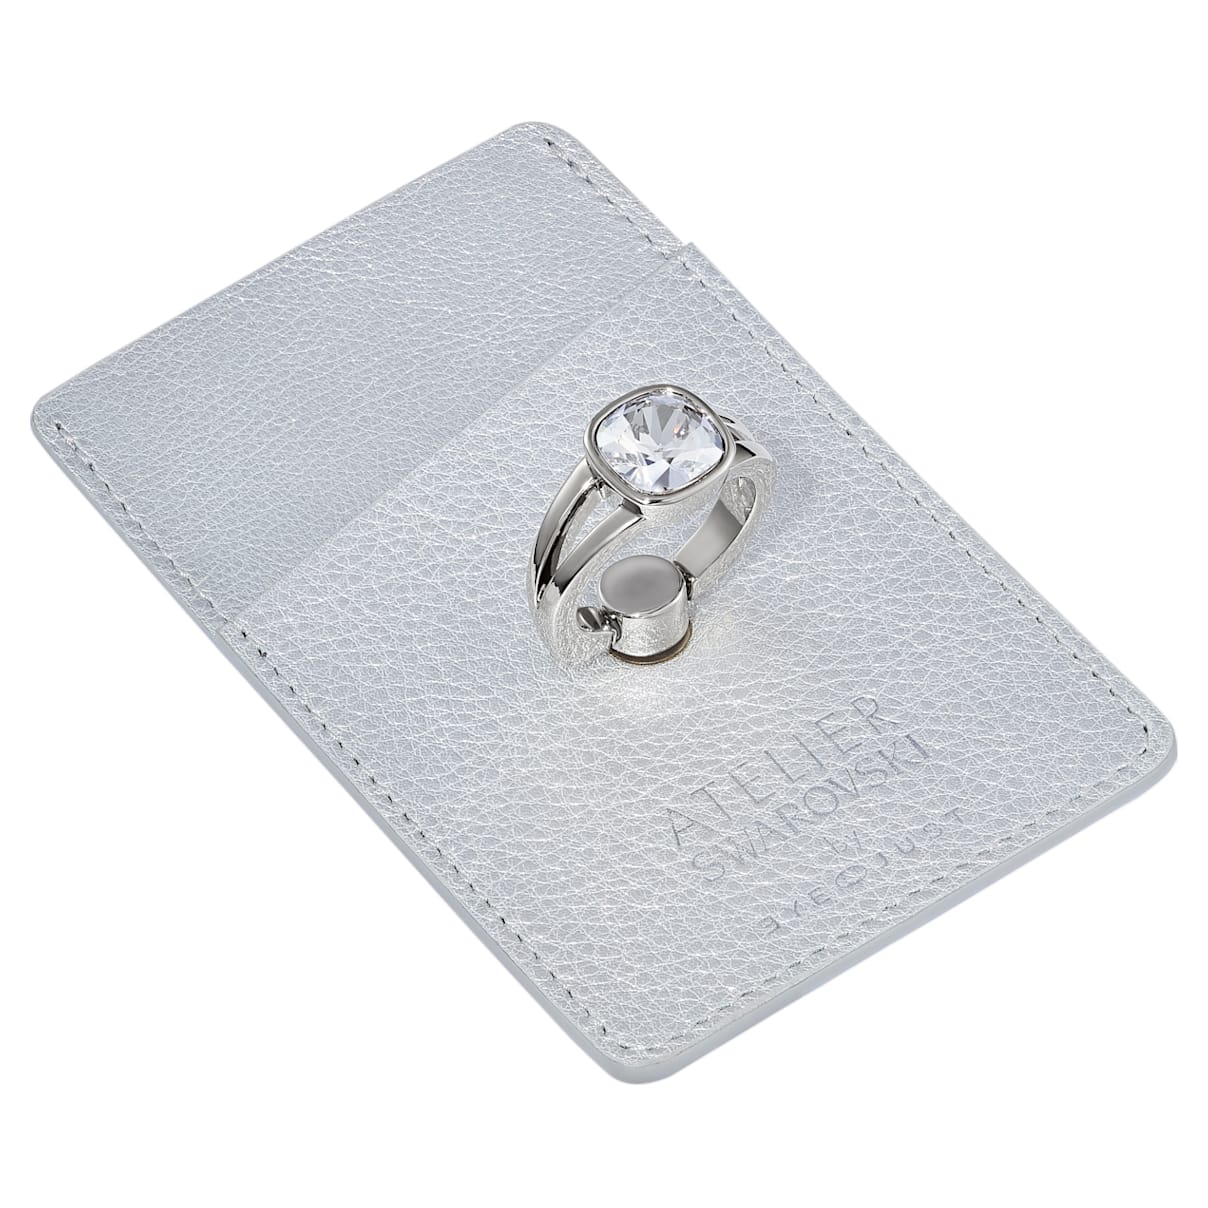 EyeJust Card and Ring Holder, Silver tone, Palladium plated